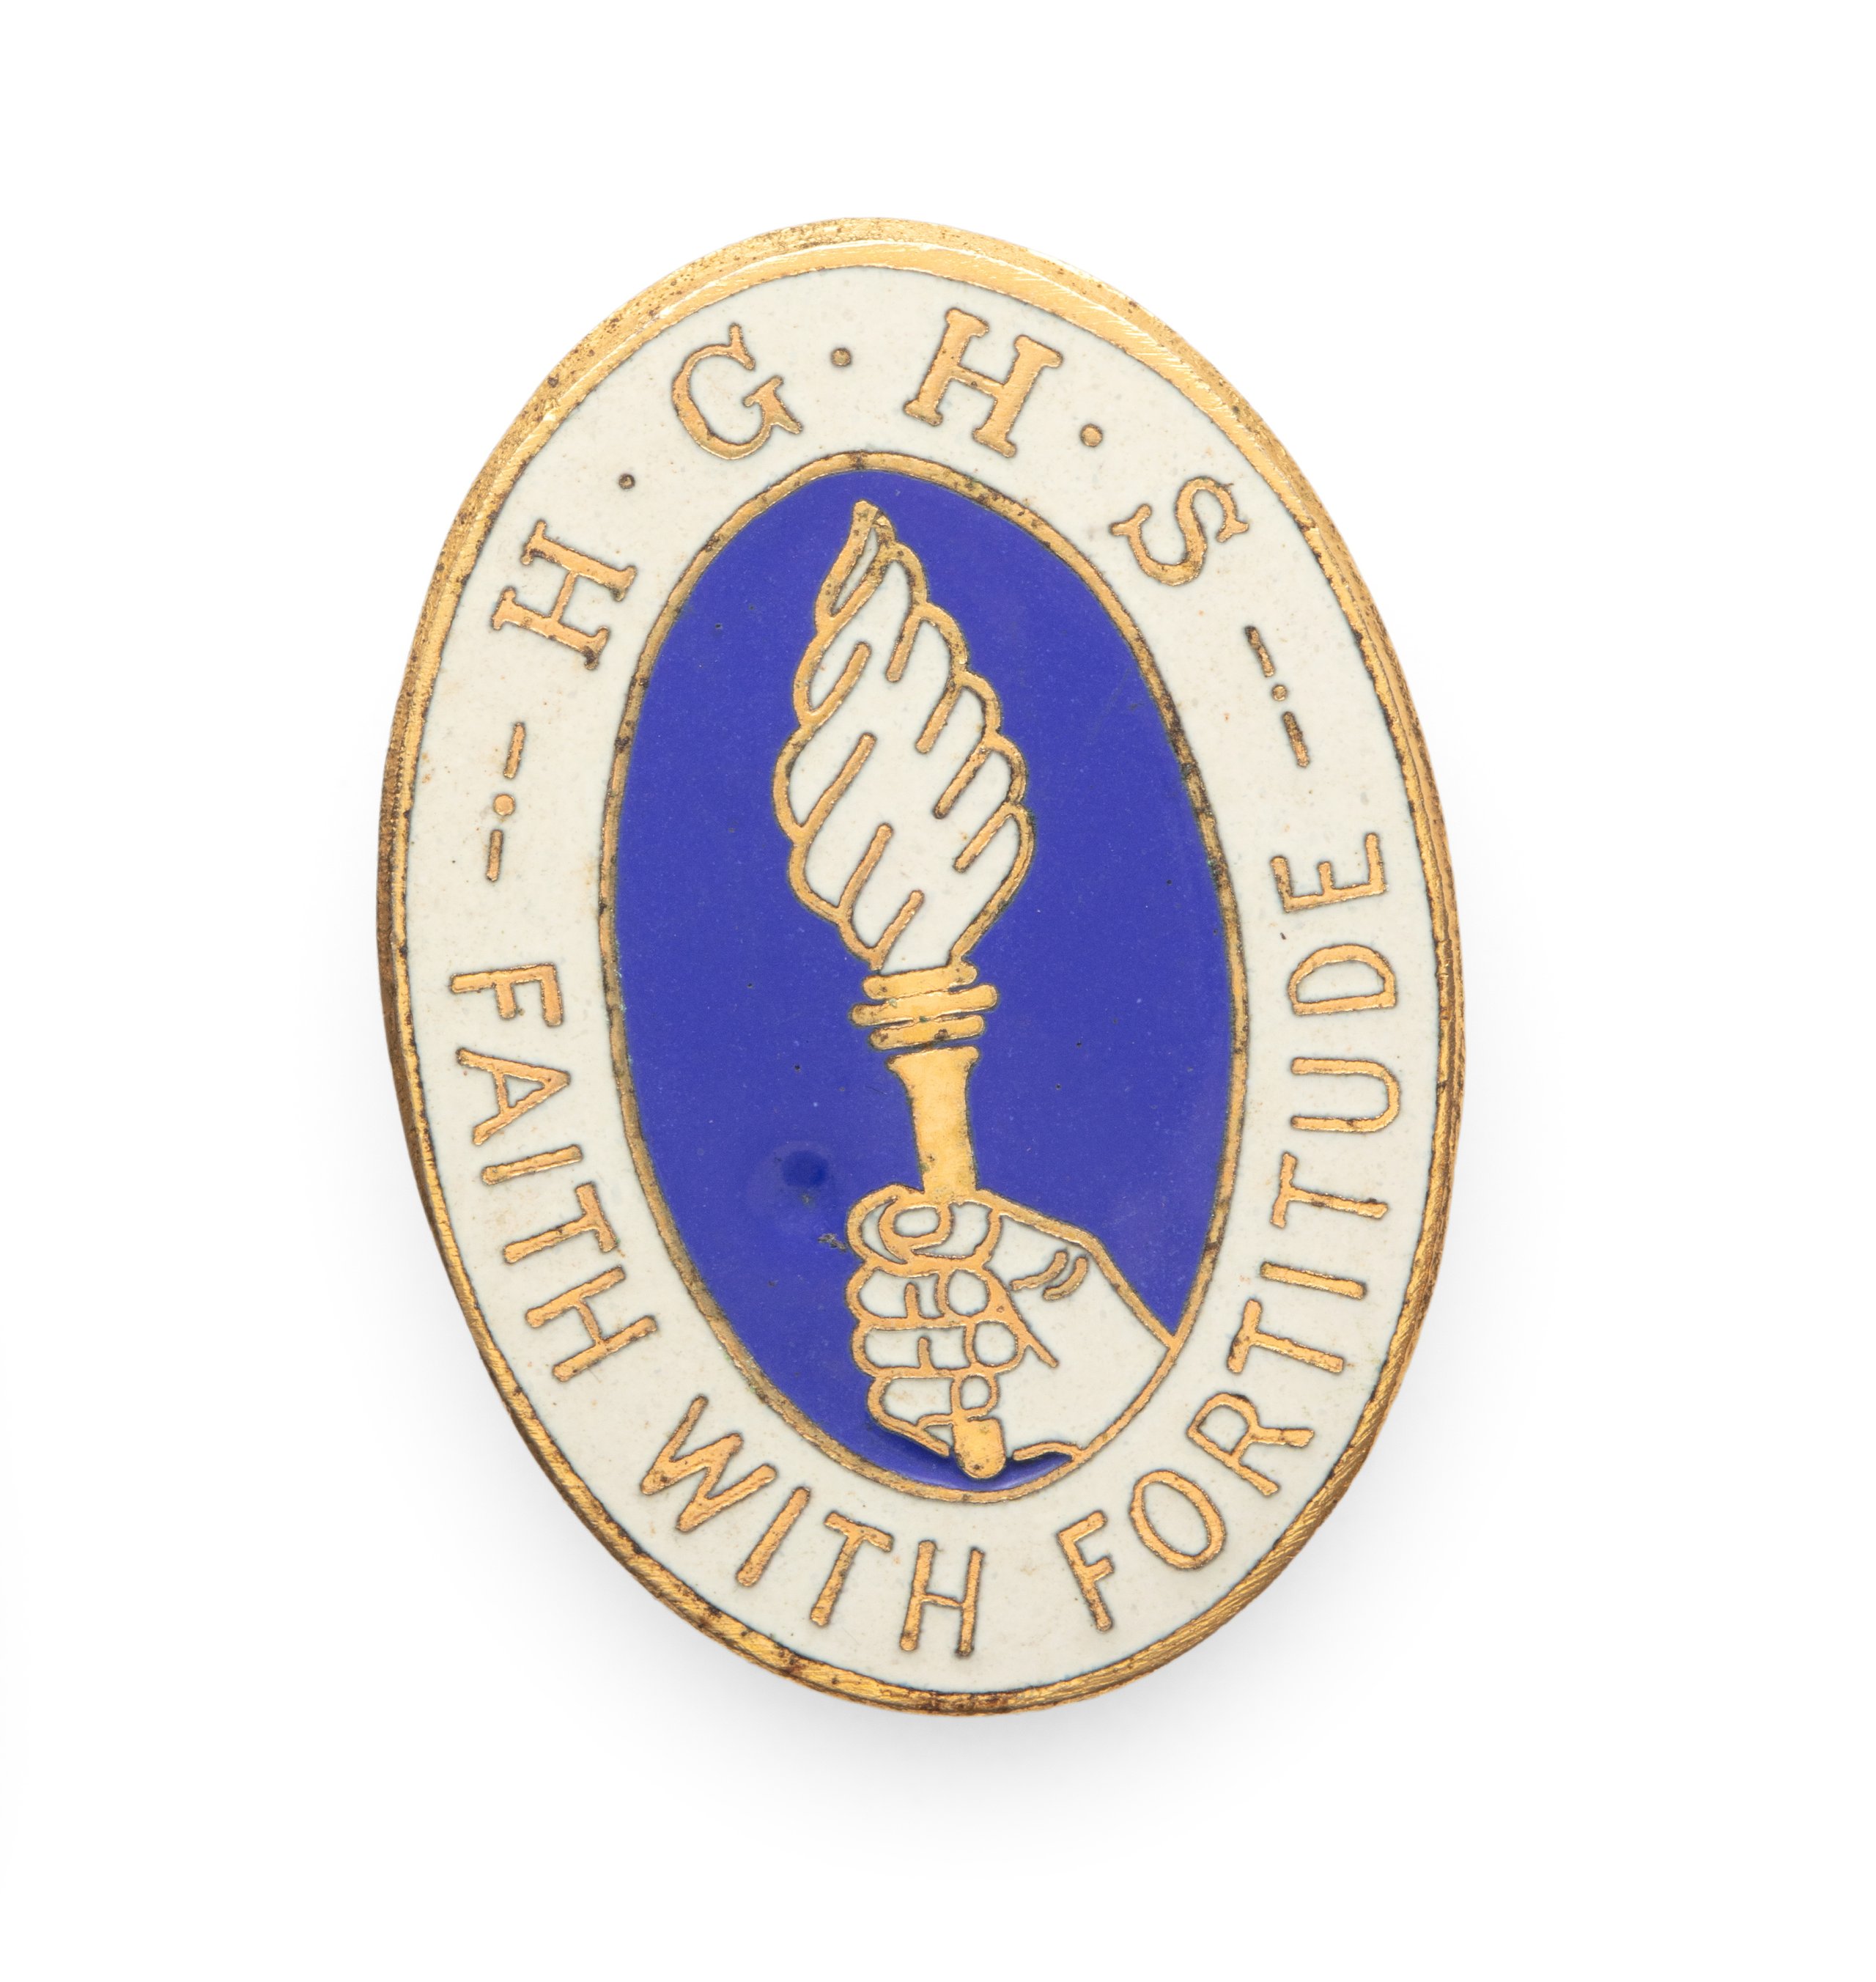 'Faith with Fortitude' school badge